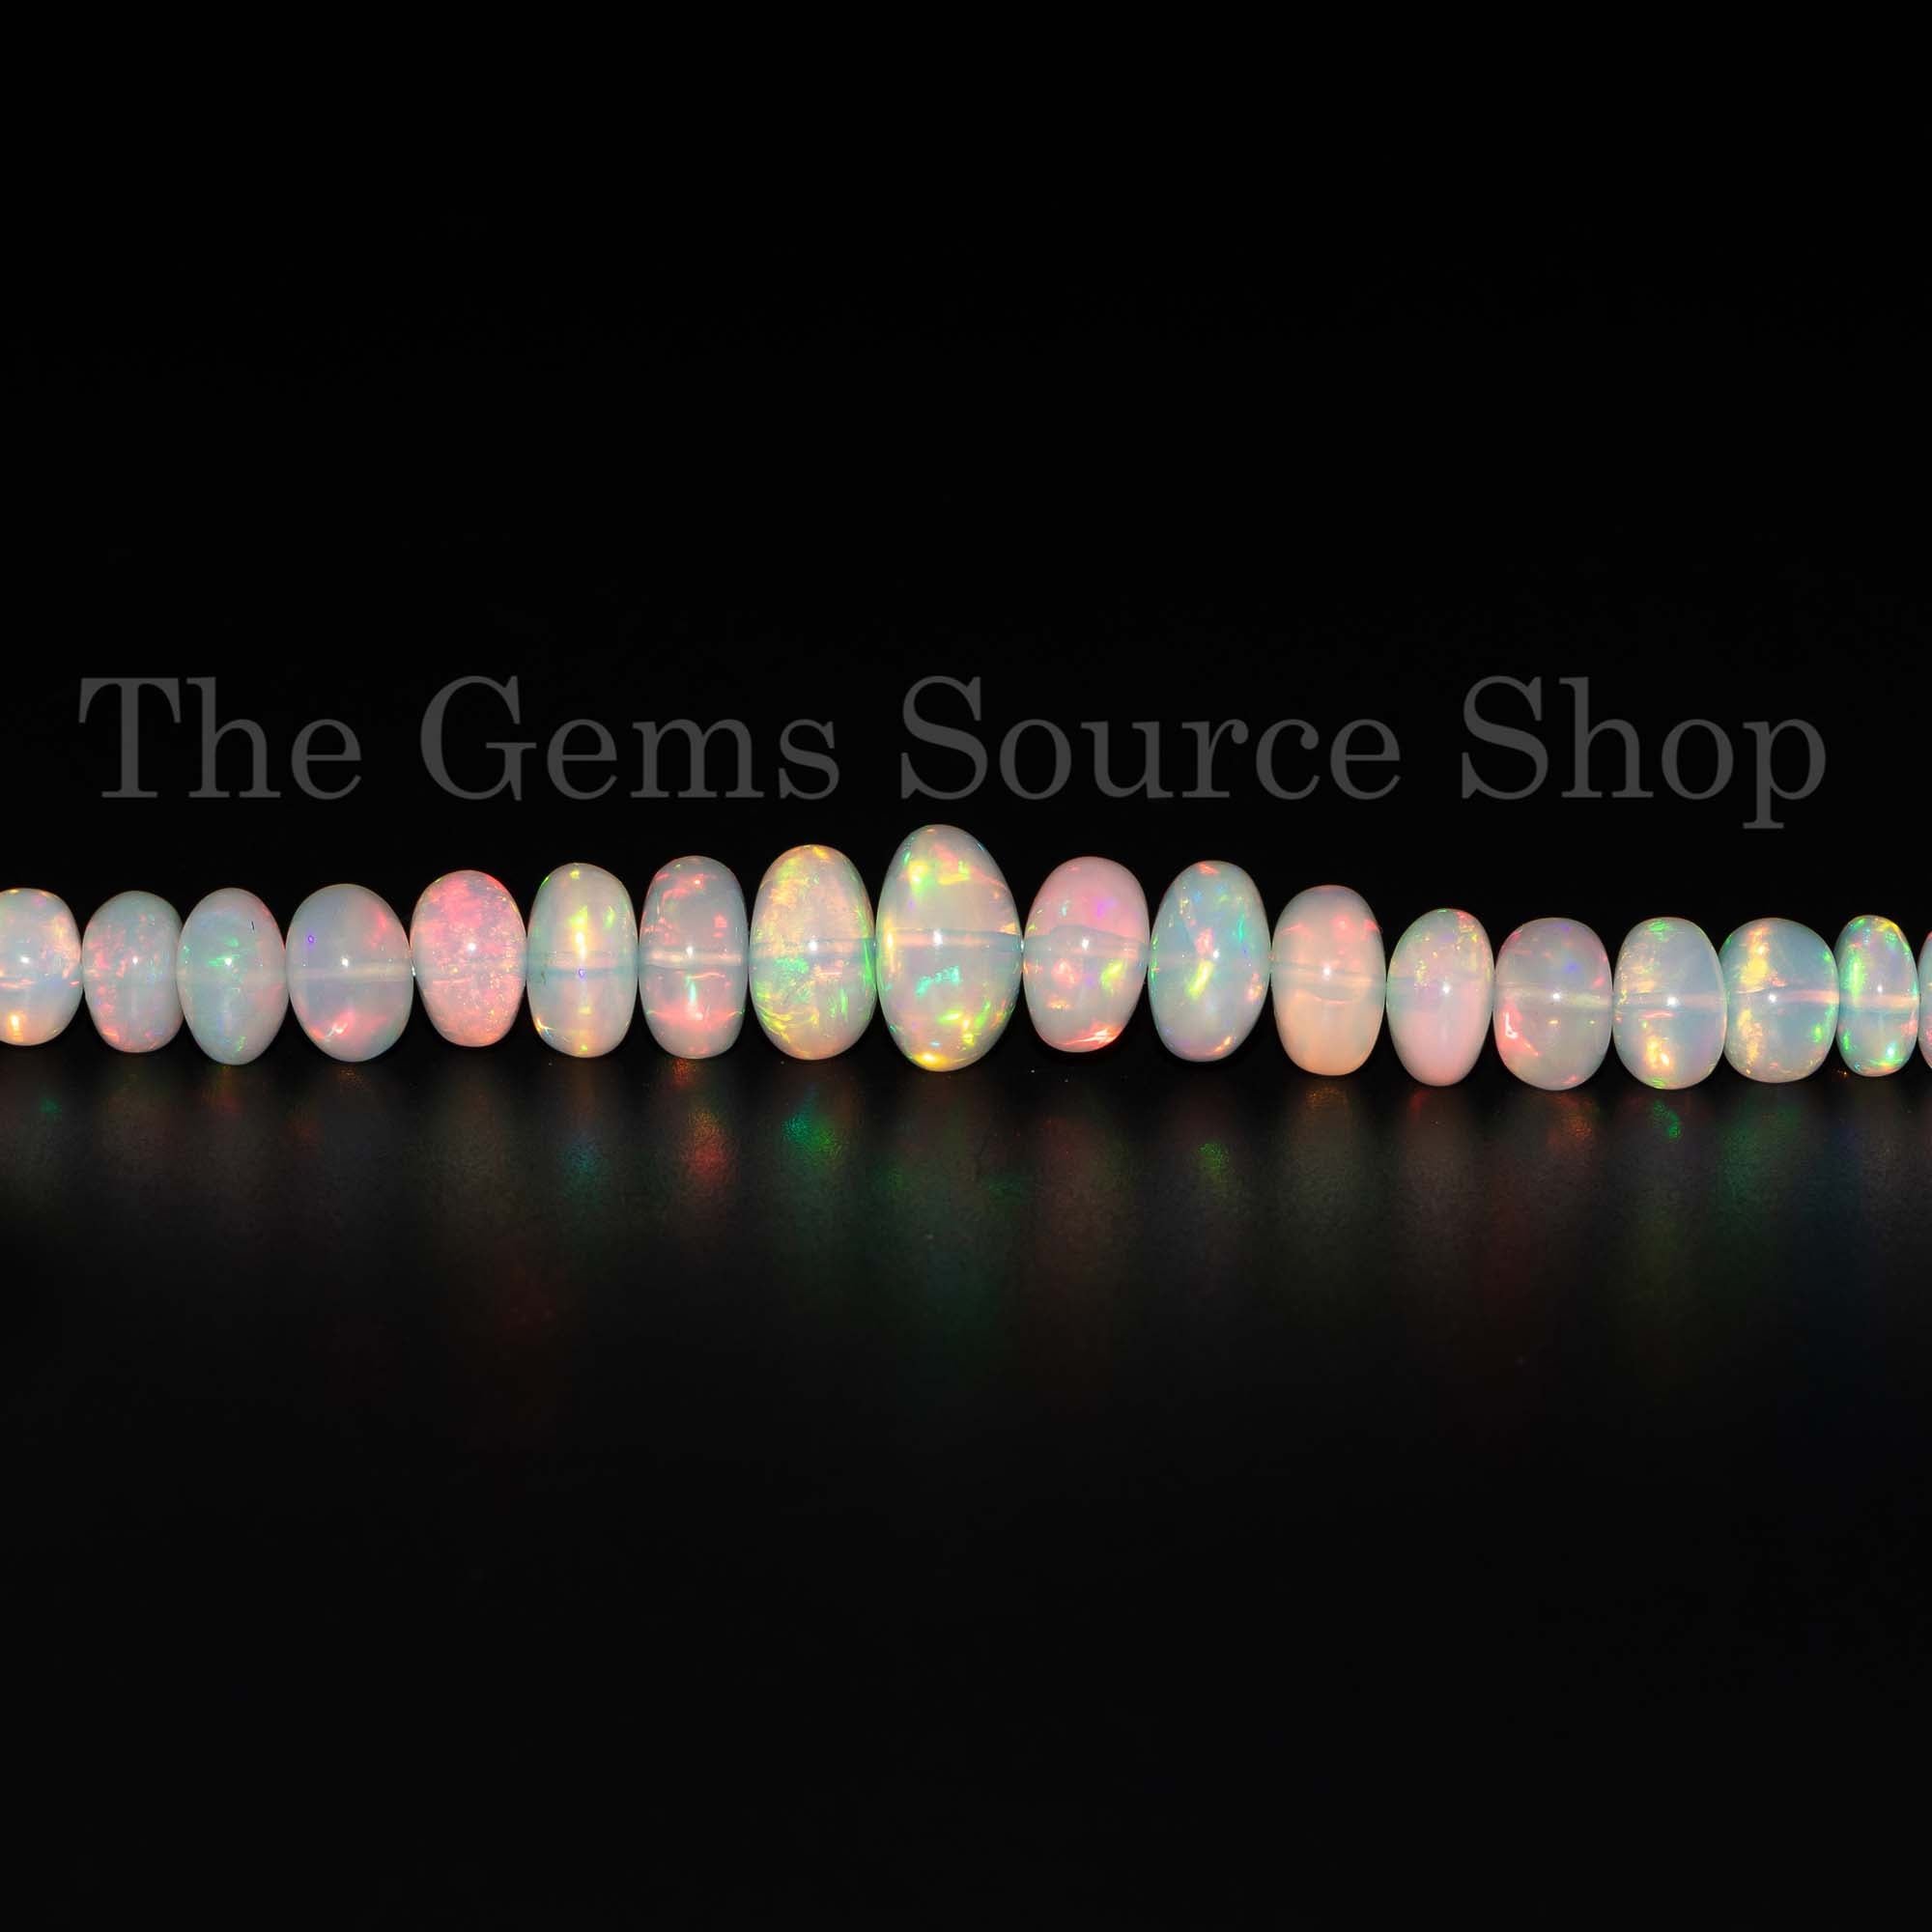 Genuine Natural Ethiopian Opal Necklace, Top Quality Opal Necklace, 4.50-11mm Gemstone Beaded Necklace, Smooth Rondelle Necklace, Opal Beads